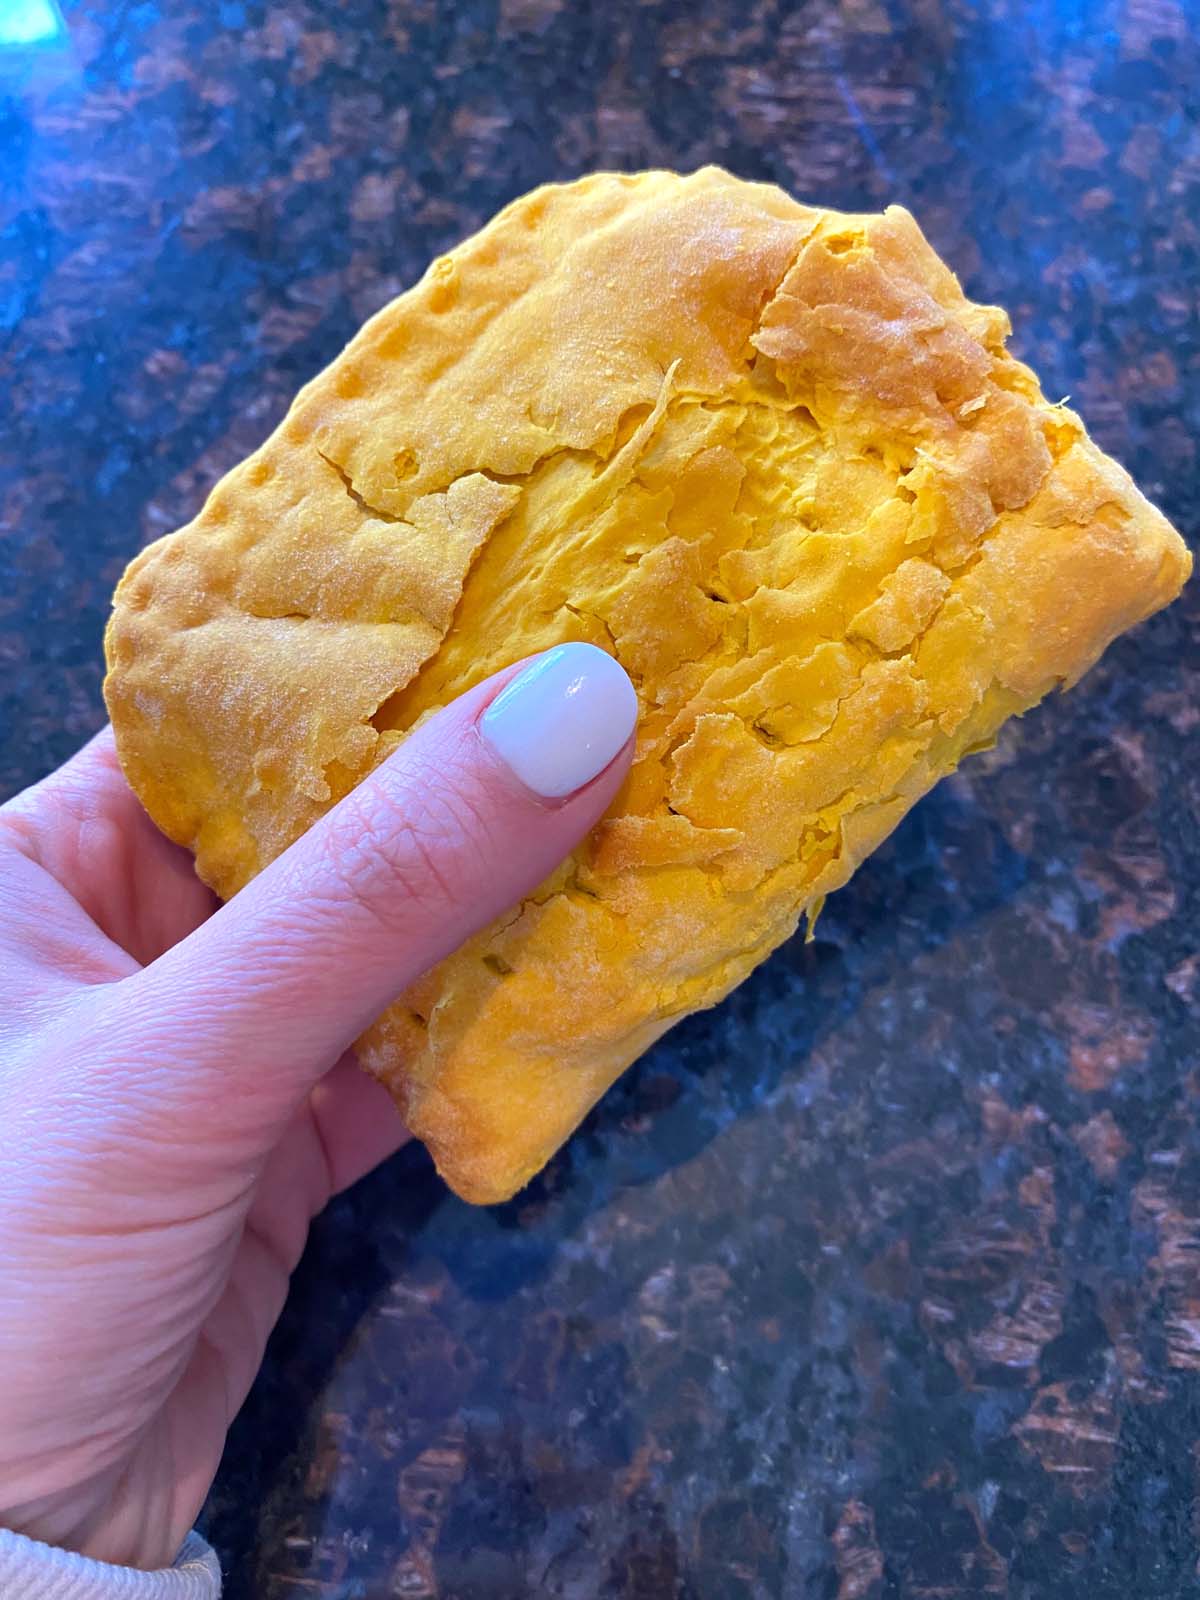 A cooked Jamaican beef patty being held up.